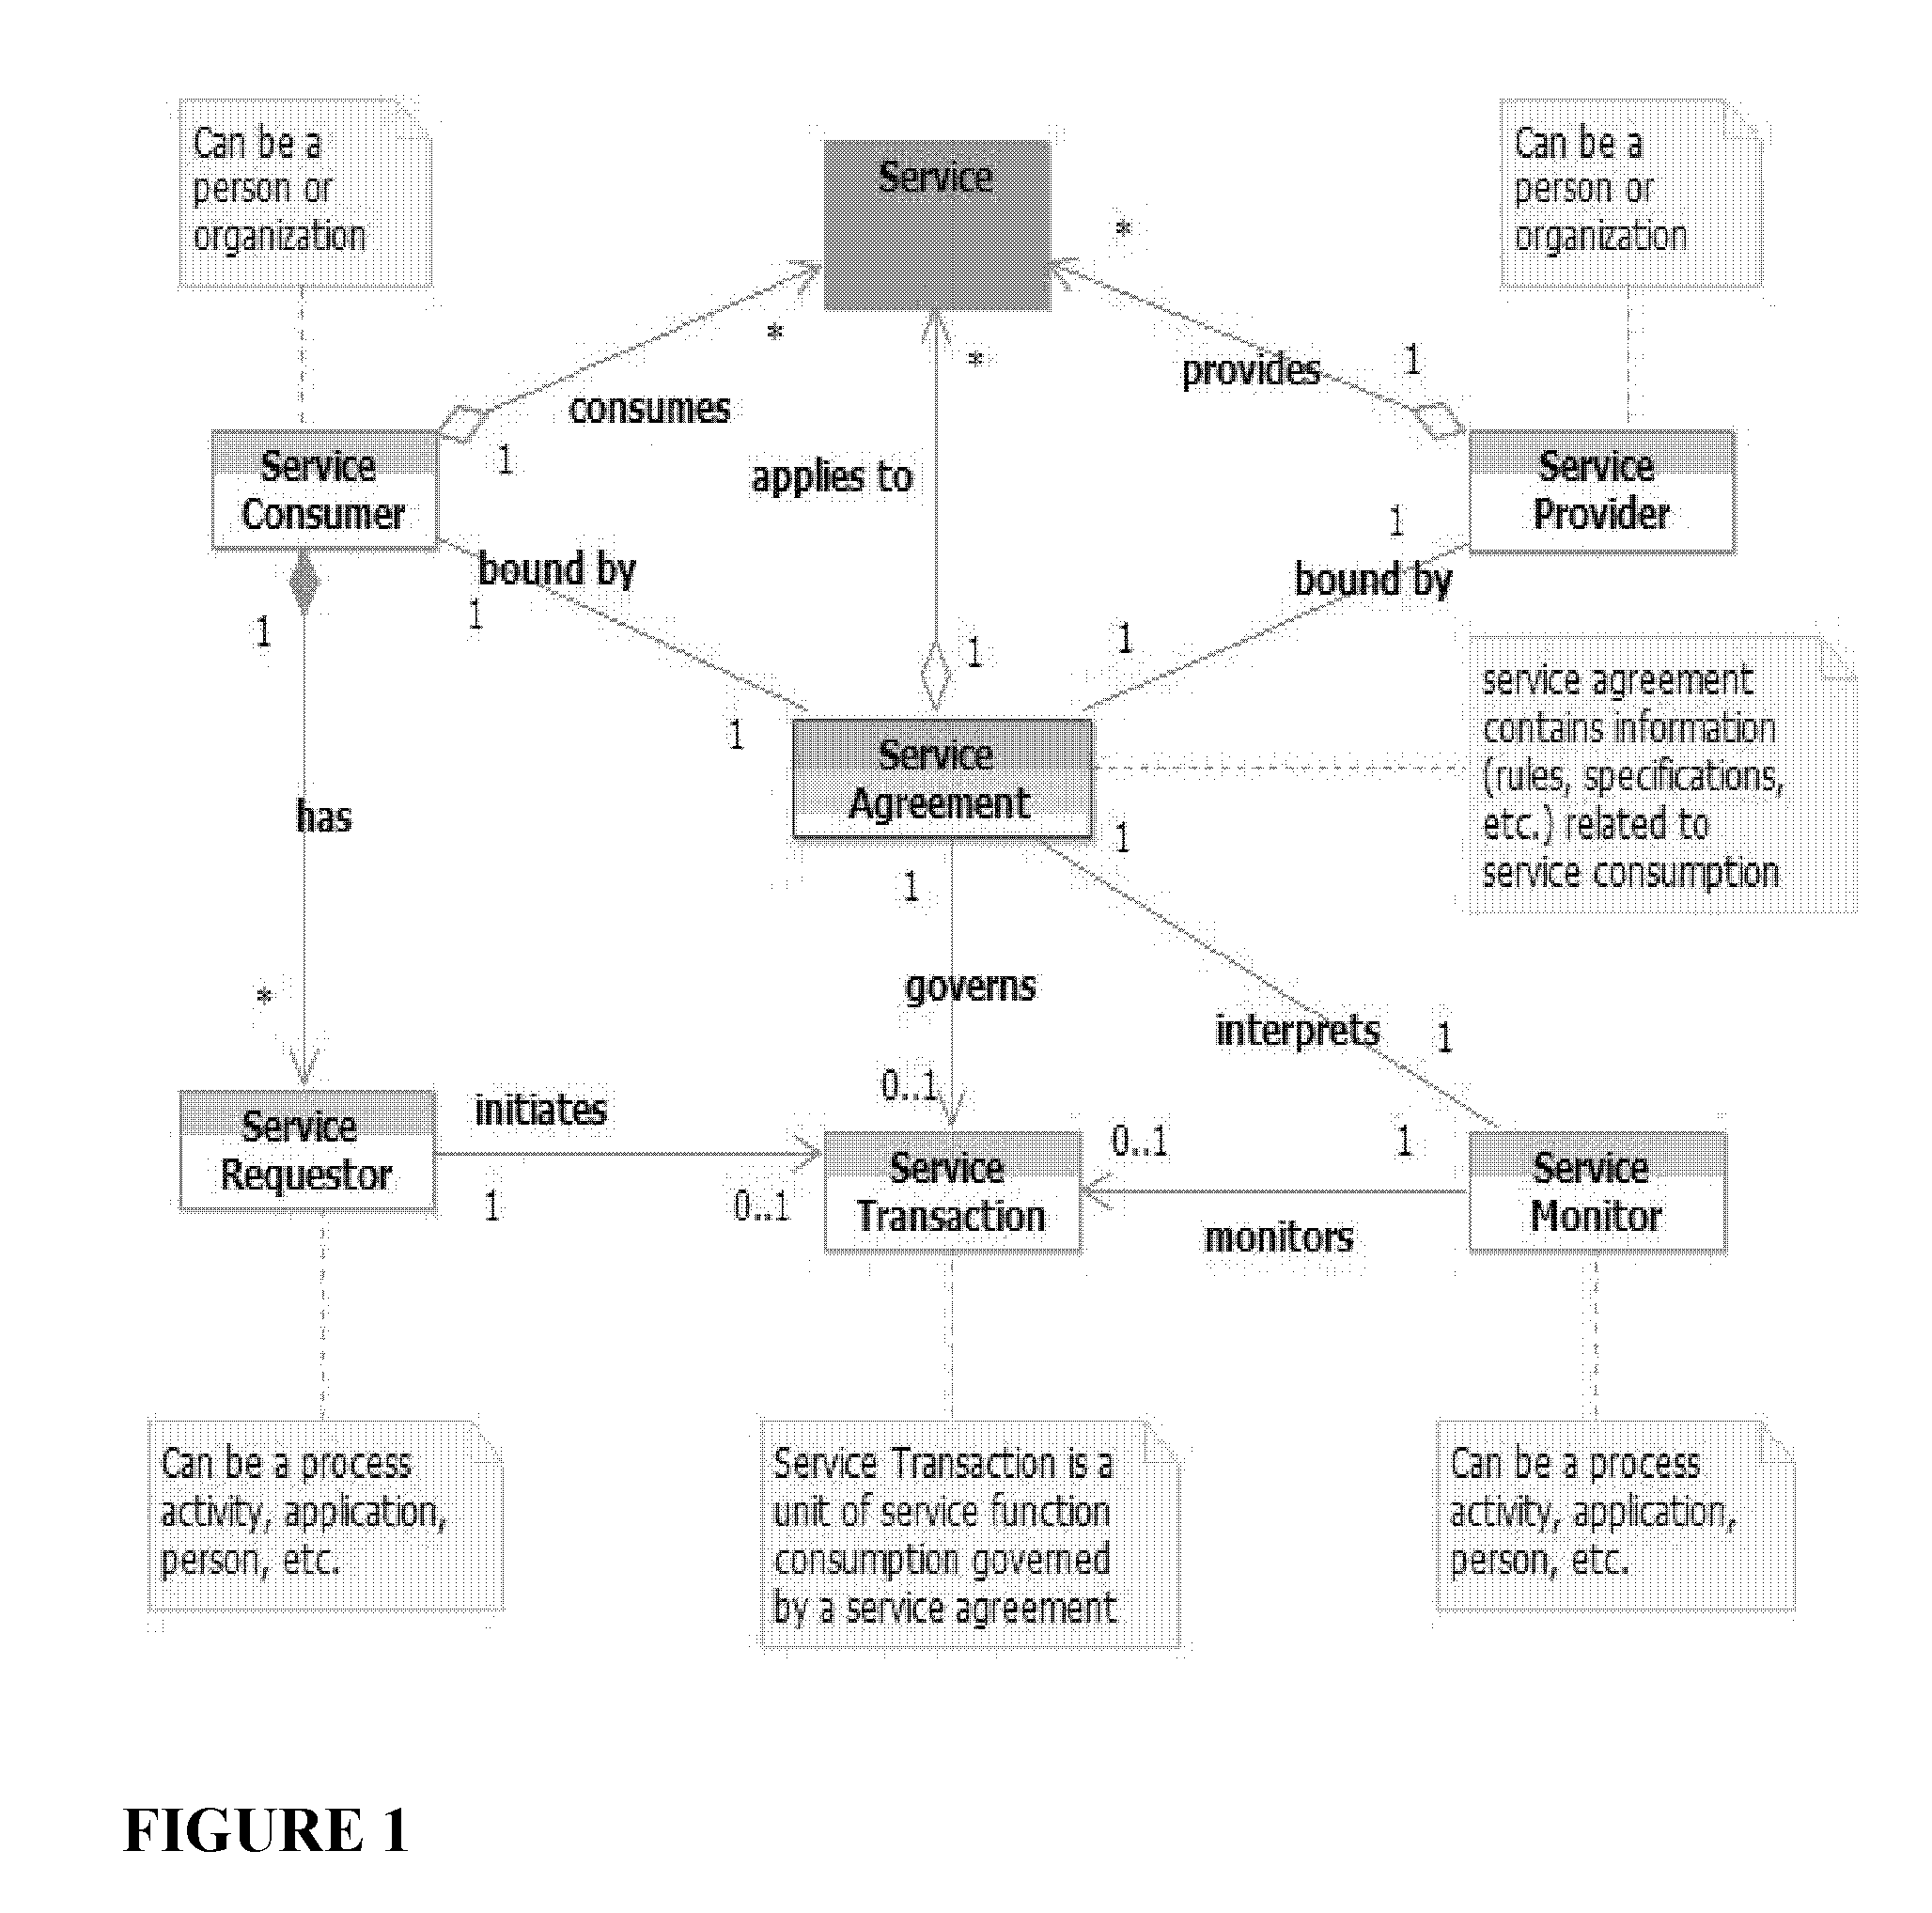 Method and system for modeling services in a service-oriented business